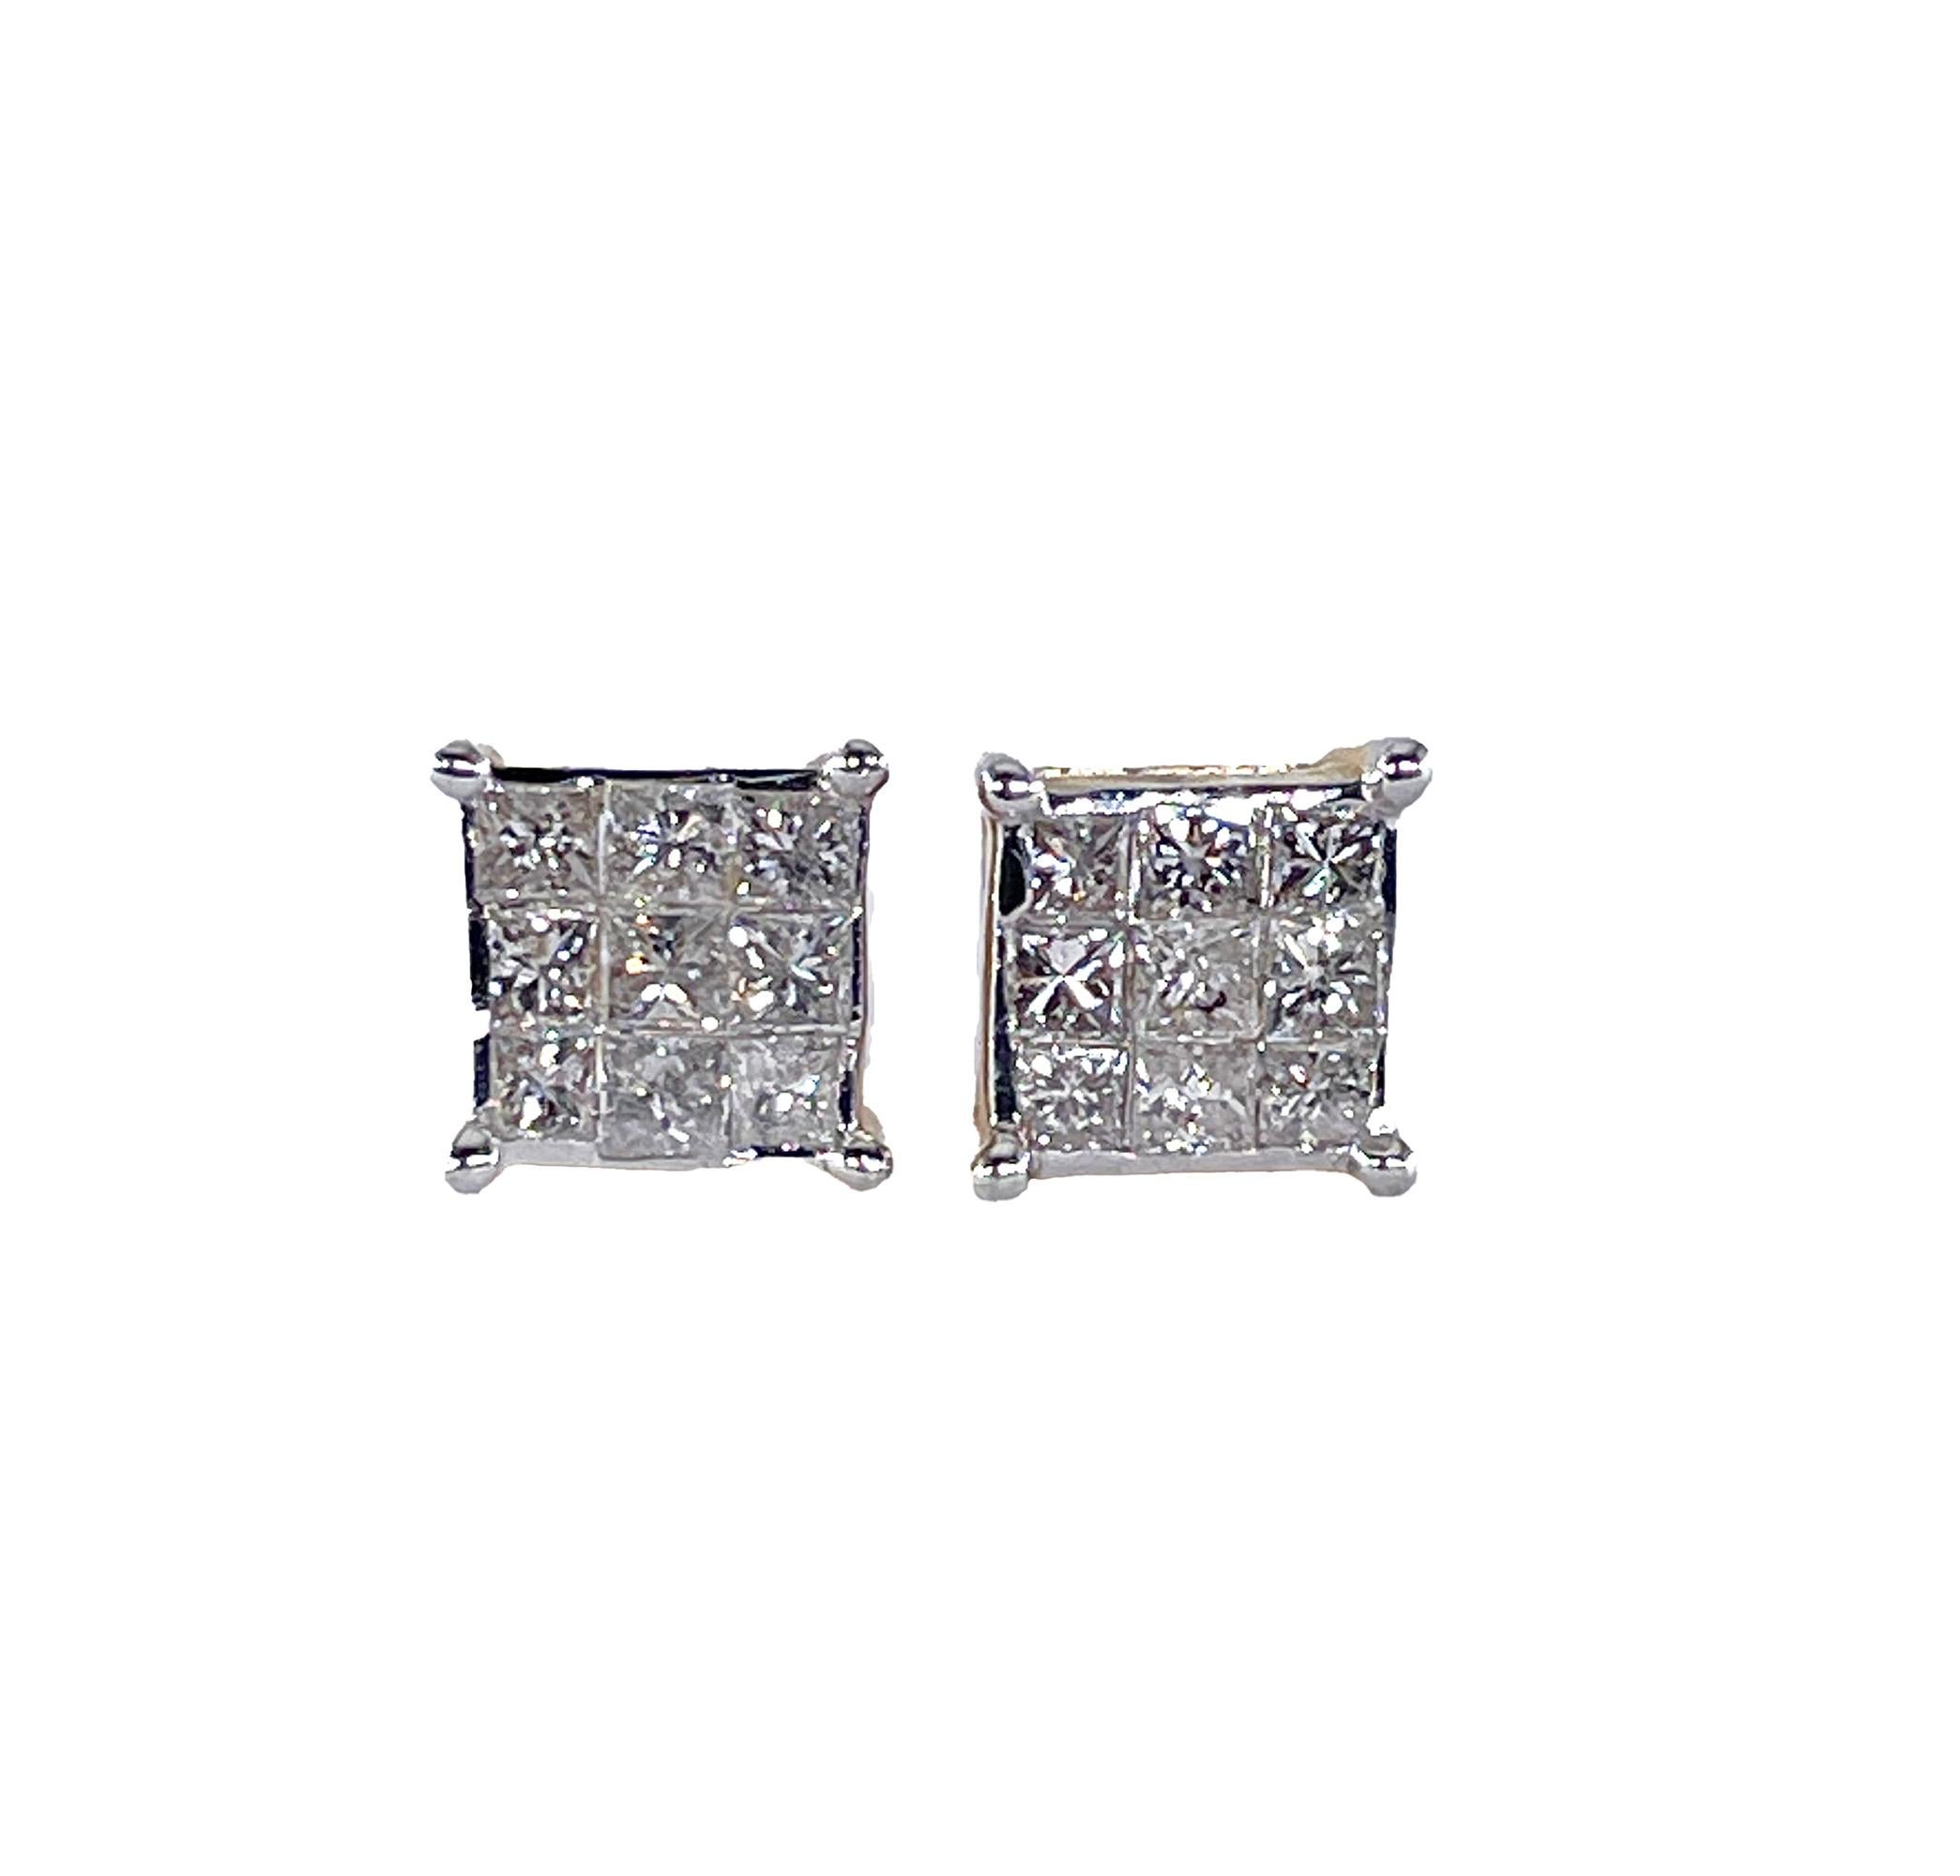 Unisex Invisible Set 1.50ctw Princess Cut Diamond Vintage Stud-Earrings Square Post 14k Yellow Gold Push Back.
These Unisex earrings will be a perfect gift for any occasion and proudly added to your jewelry collection. One accessory that has never